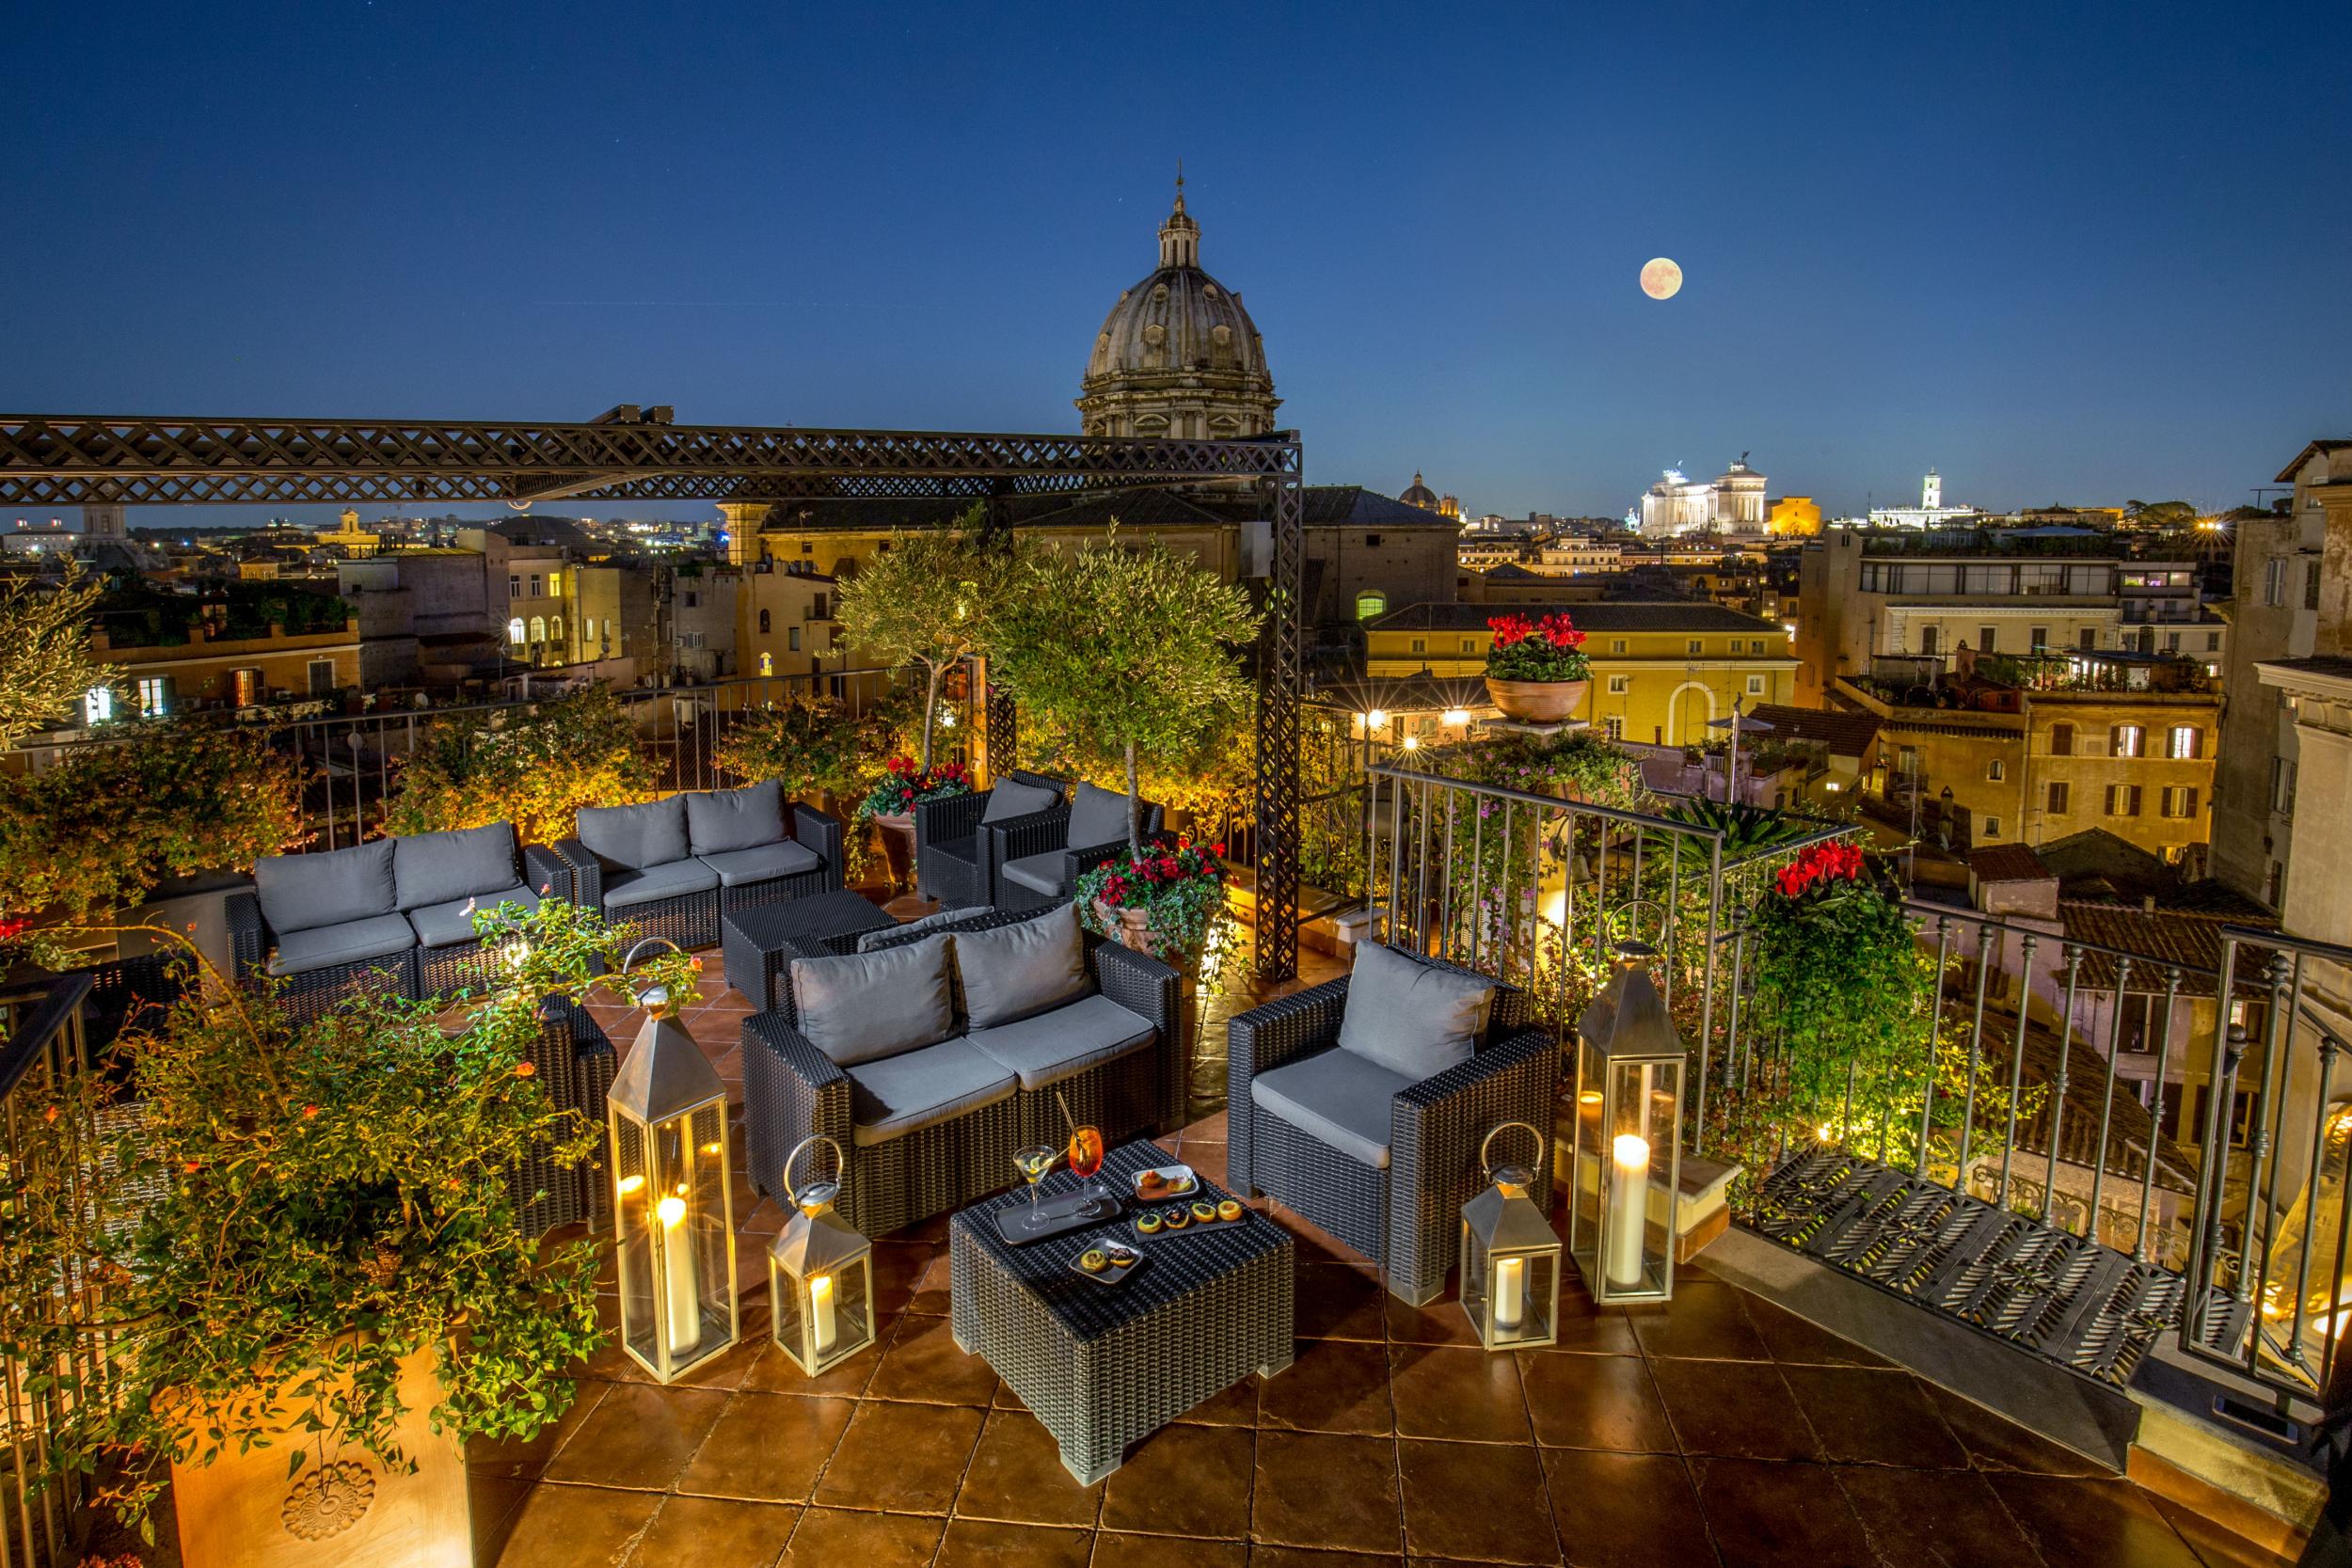 Enjoy a different view of the city from Boutique Hotel Campo de' Fiori's roof garden